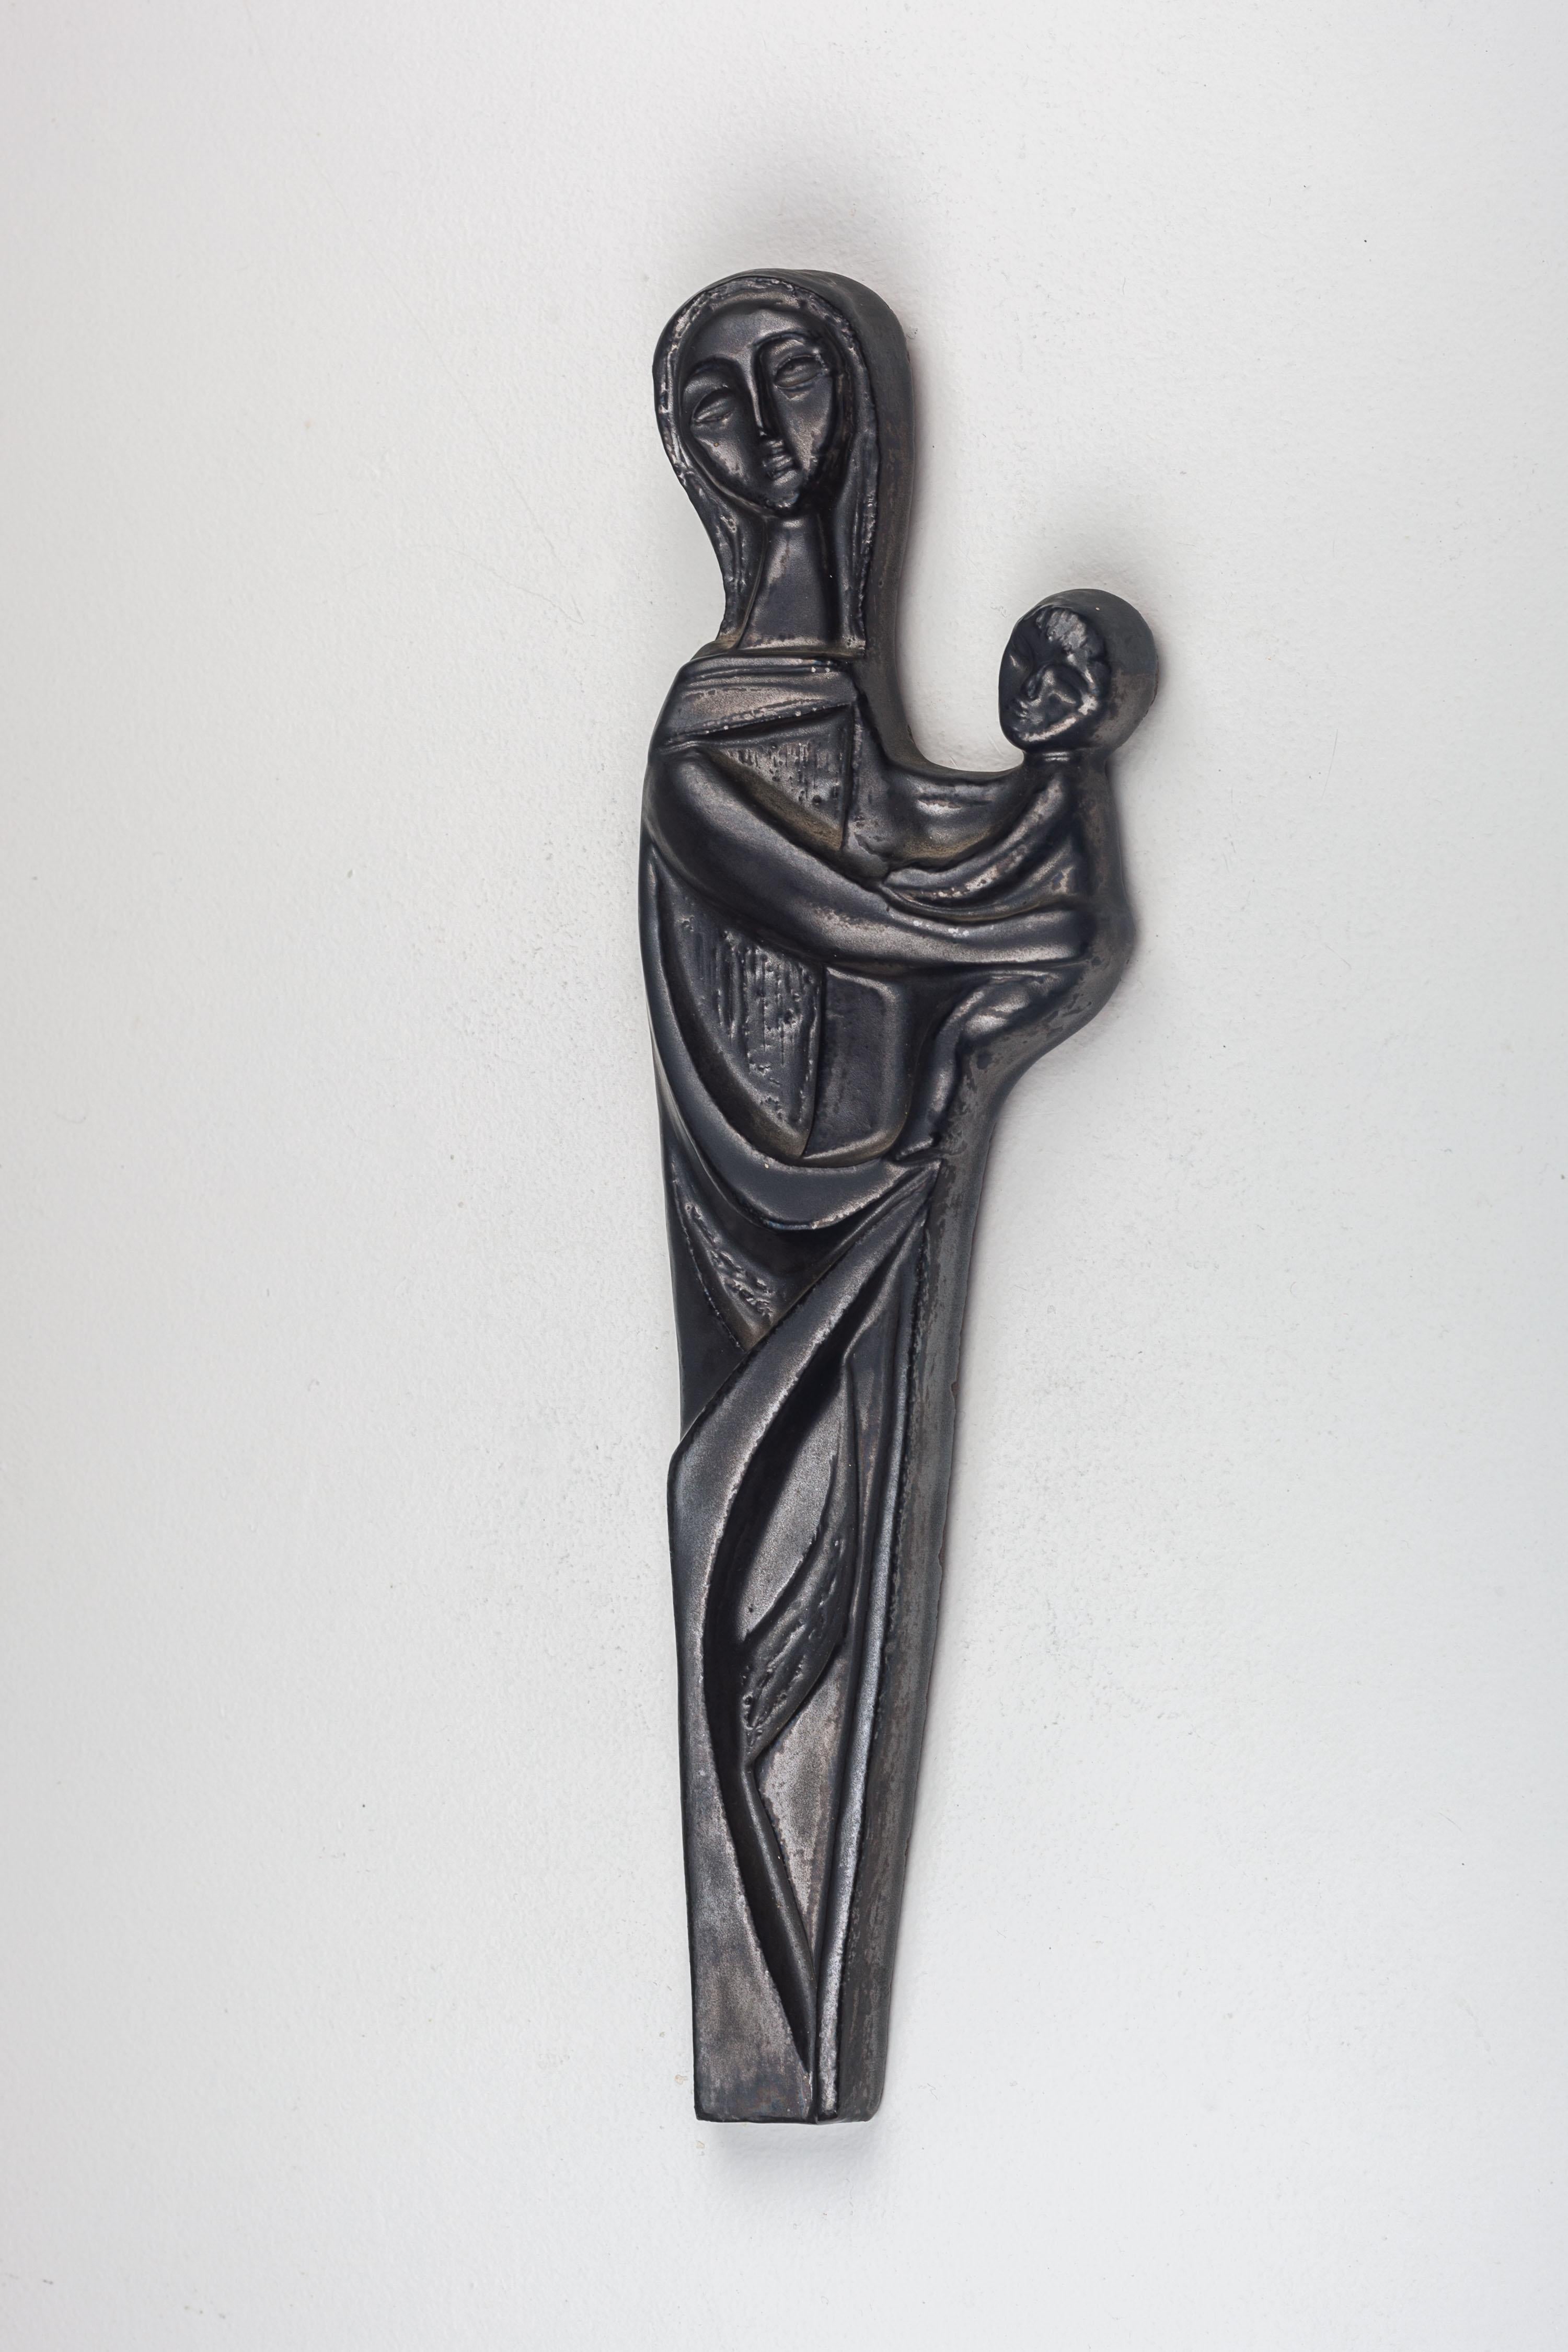 Mid-20th Century Ceramic Religious Modernist Wall Art, Pewter Colored Virgin Mary and Child  For Sale